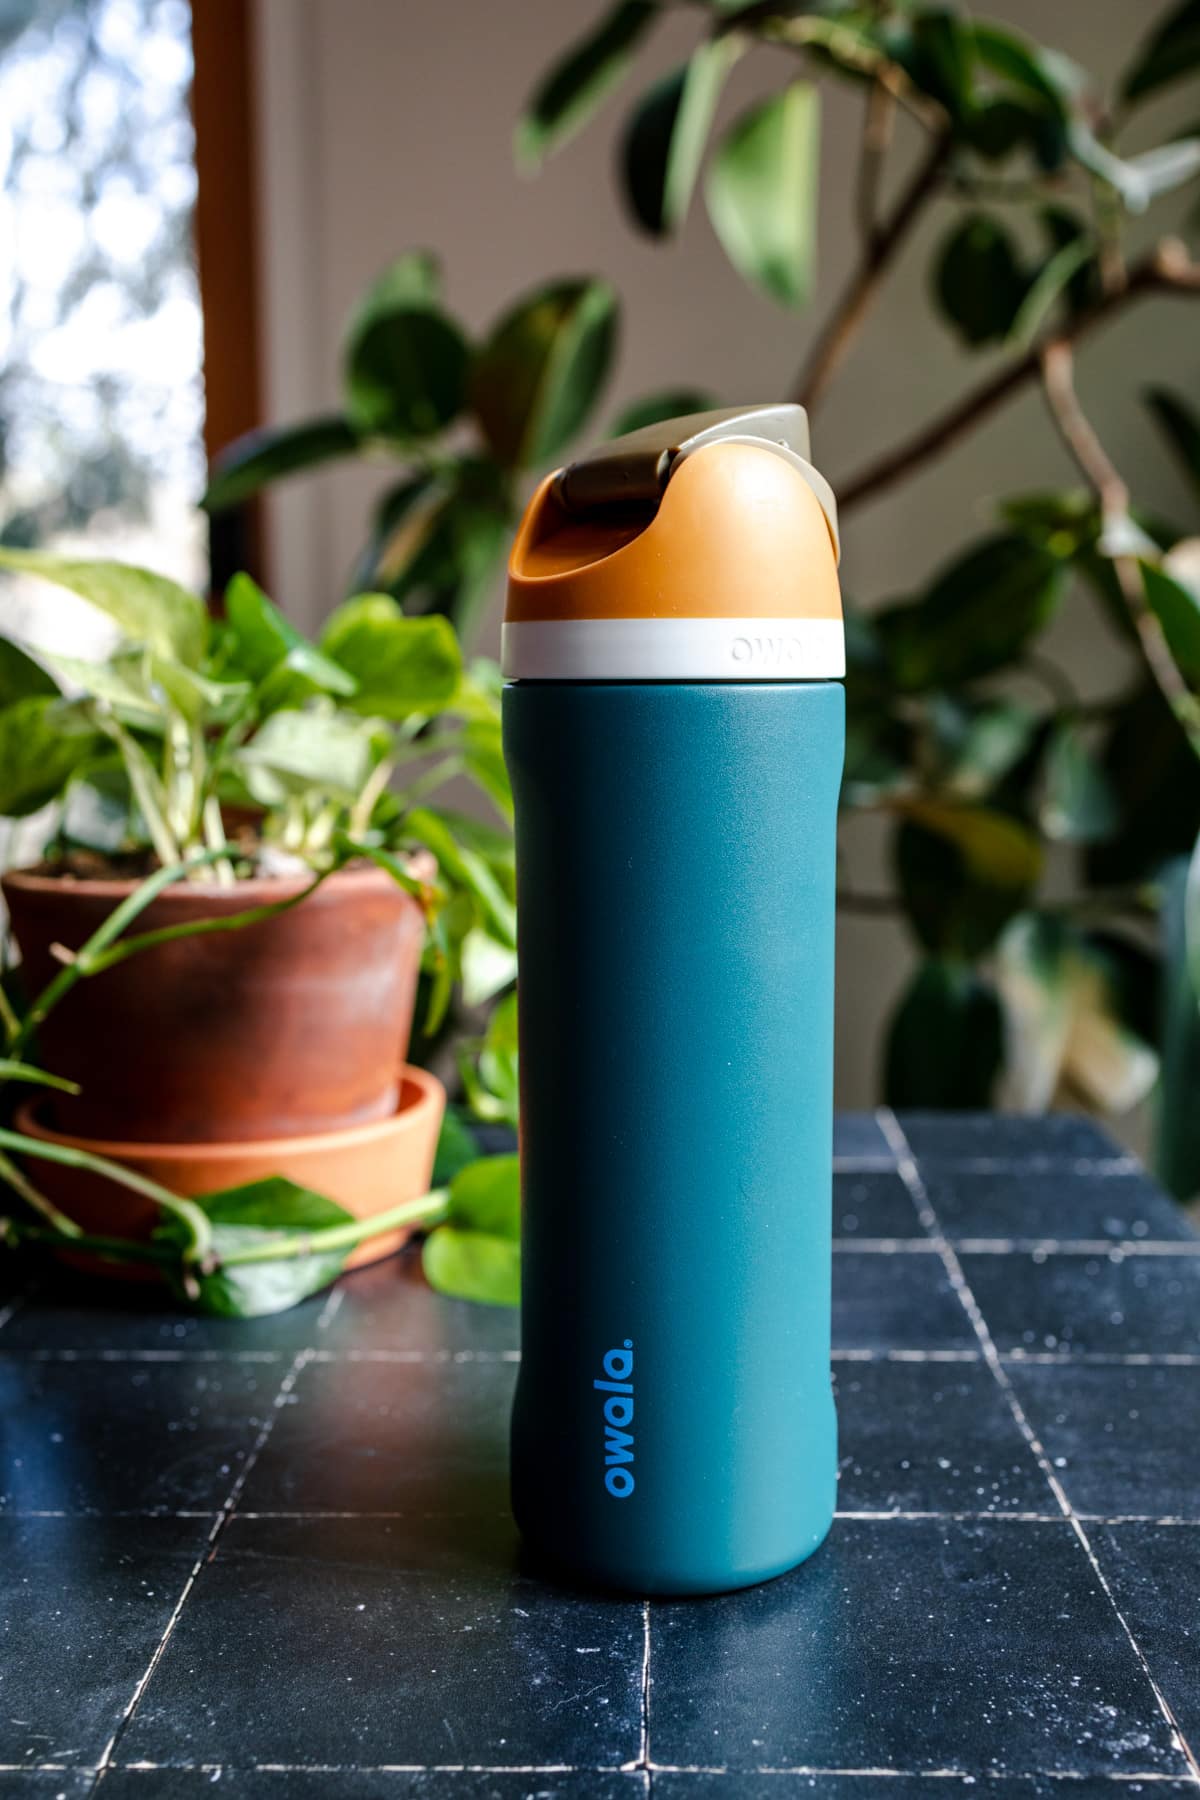 Teal colored waterbottle with light orange and tan lid next to a pothos planted in a terracotta pot.